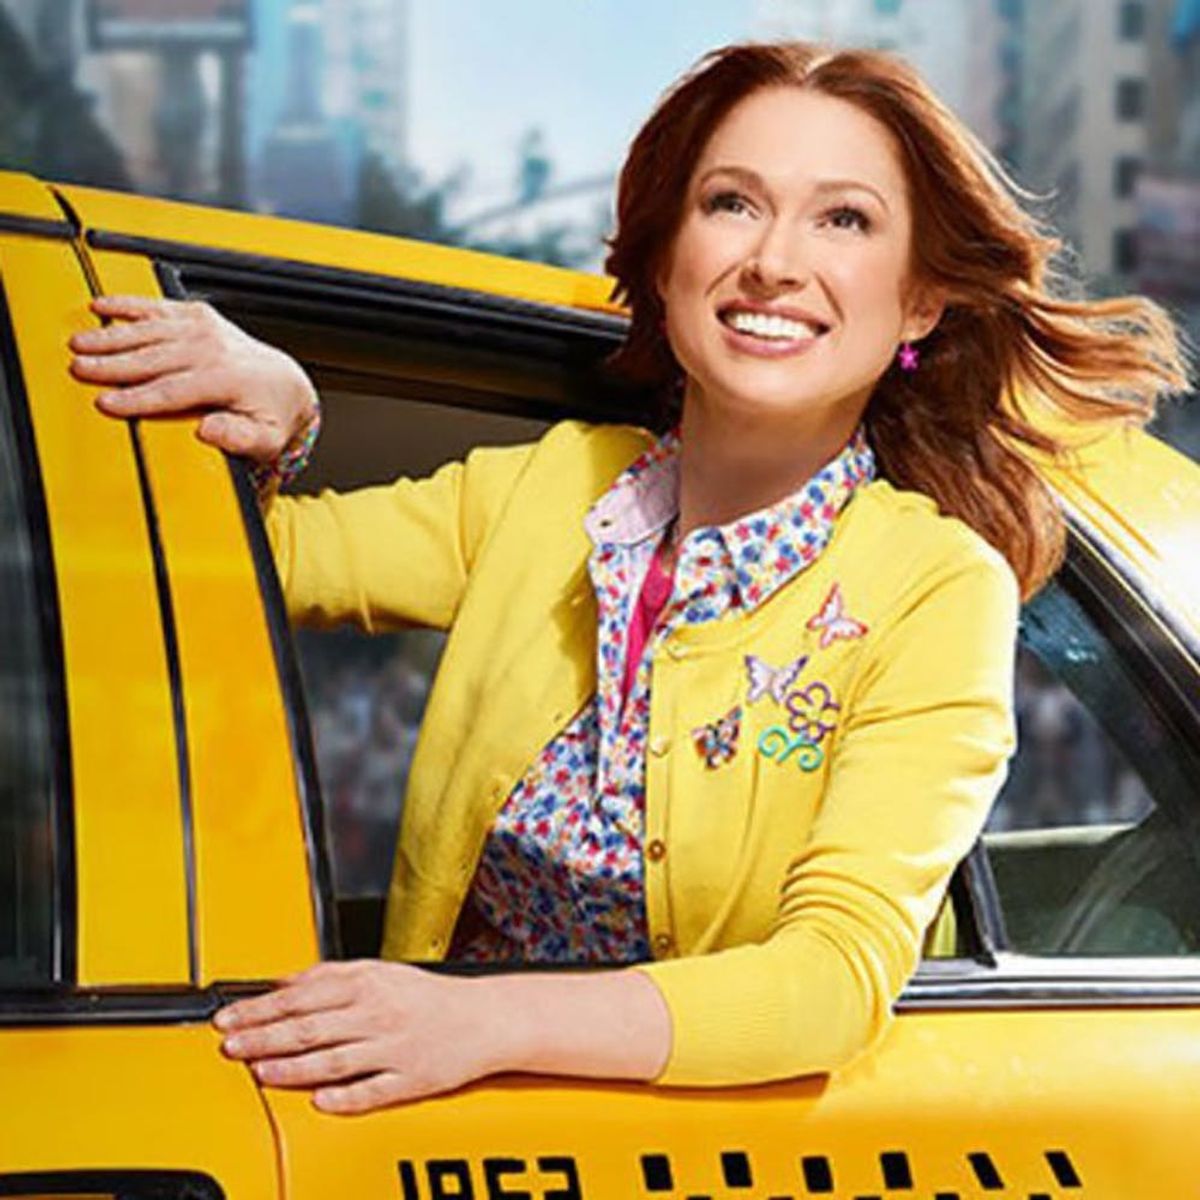 How to Wear Color Like the Unbreakable Kimmy Schmidt